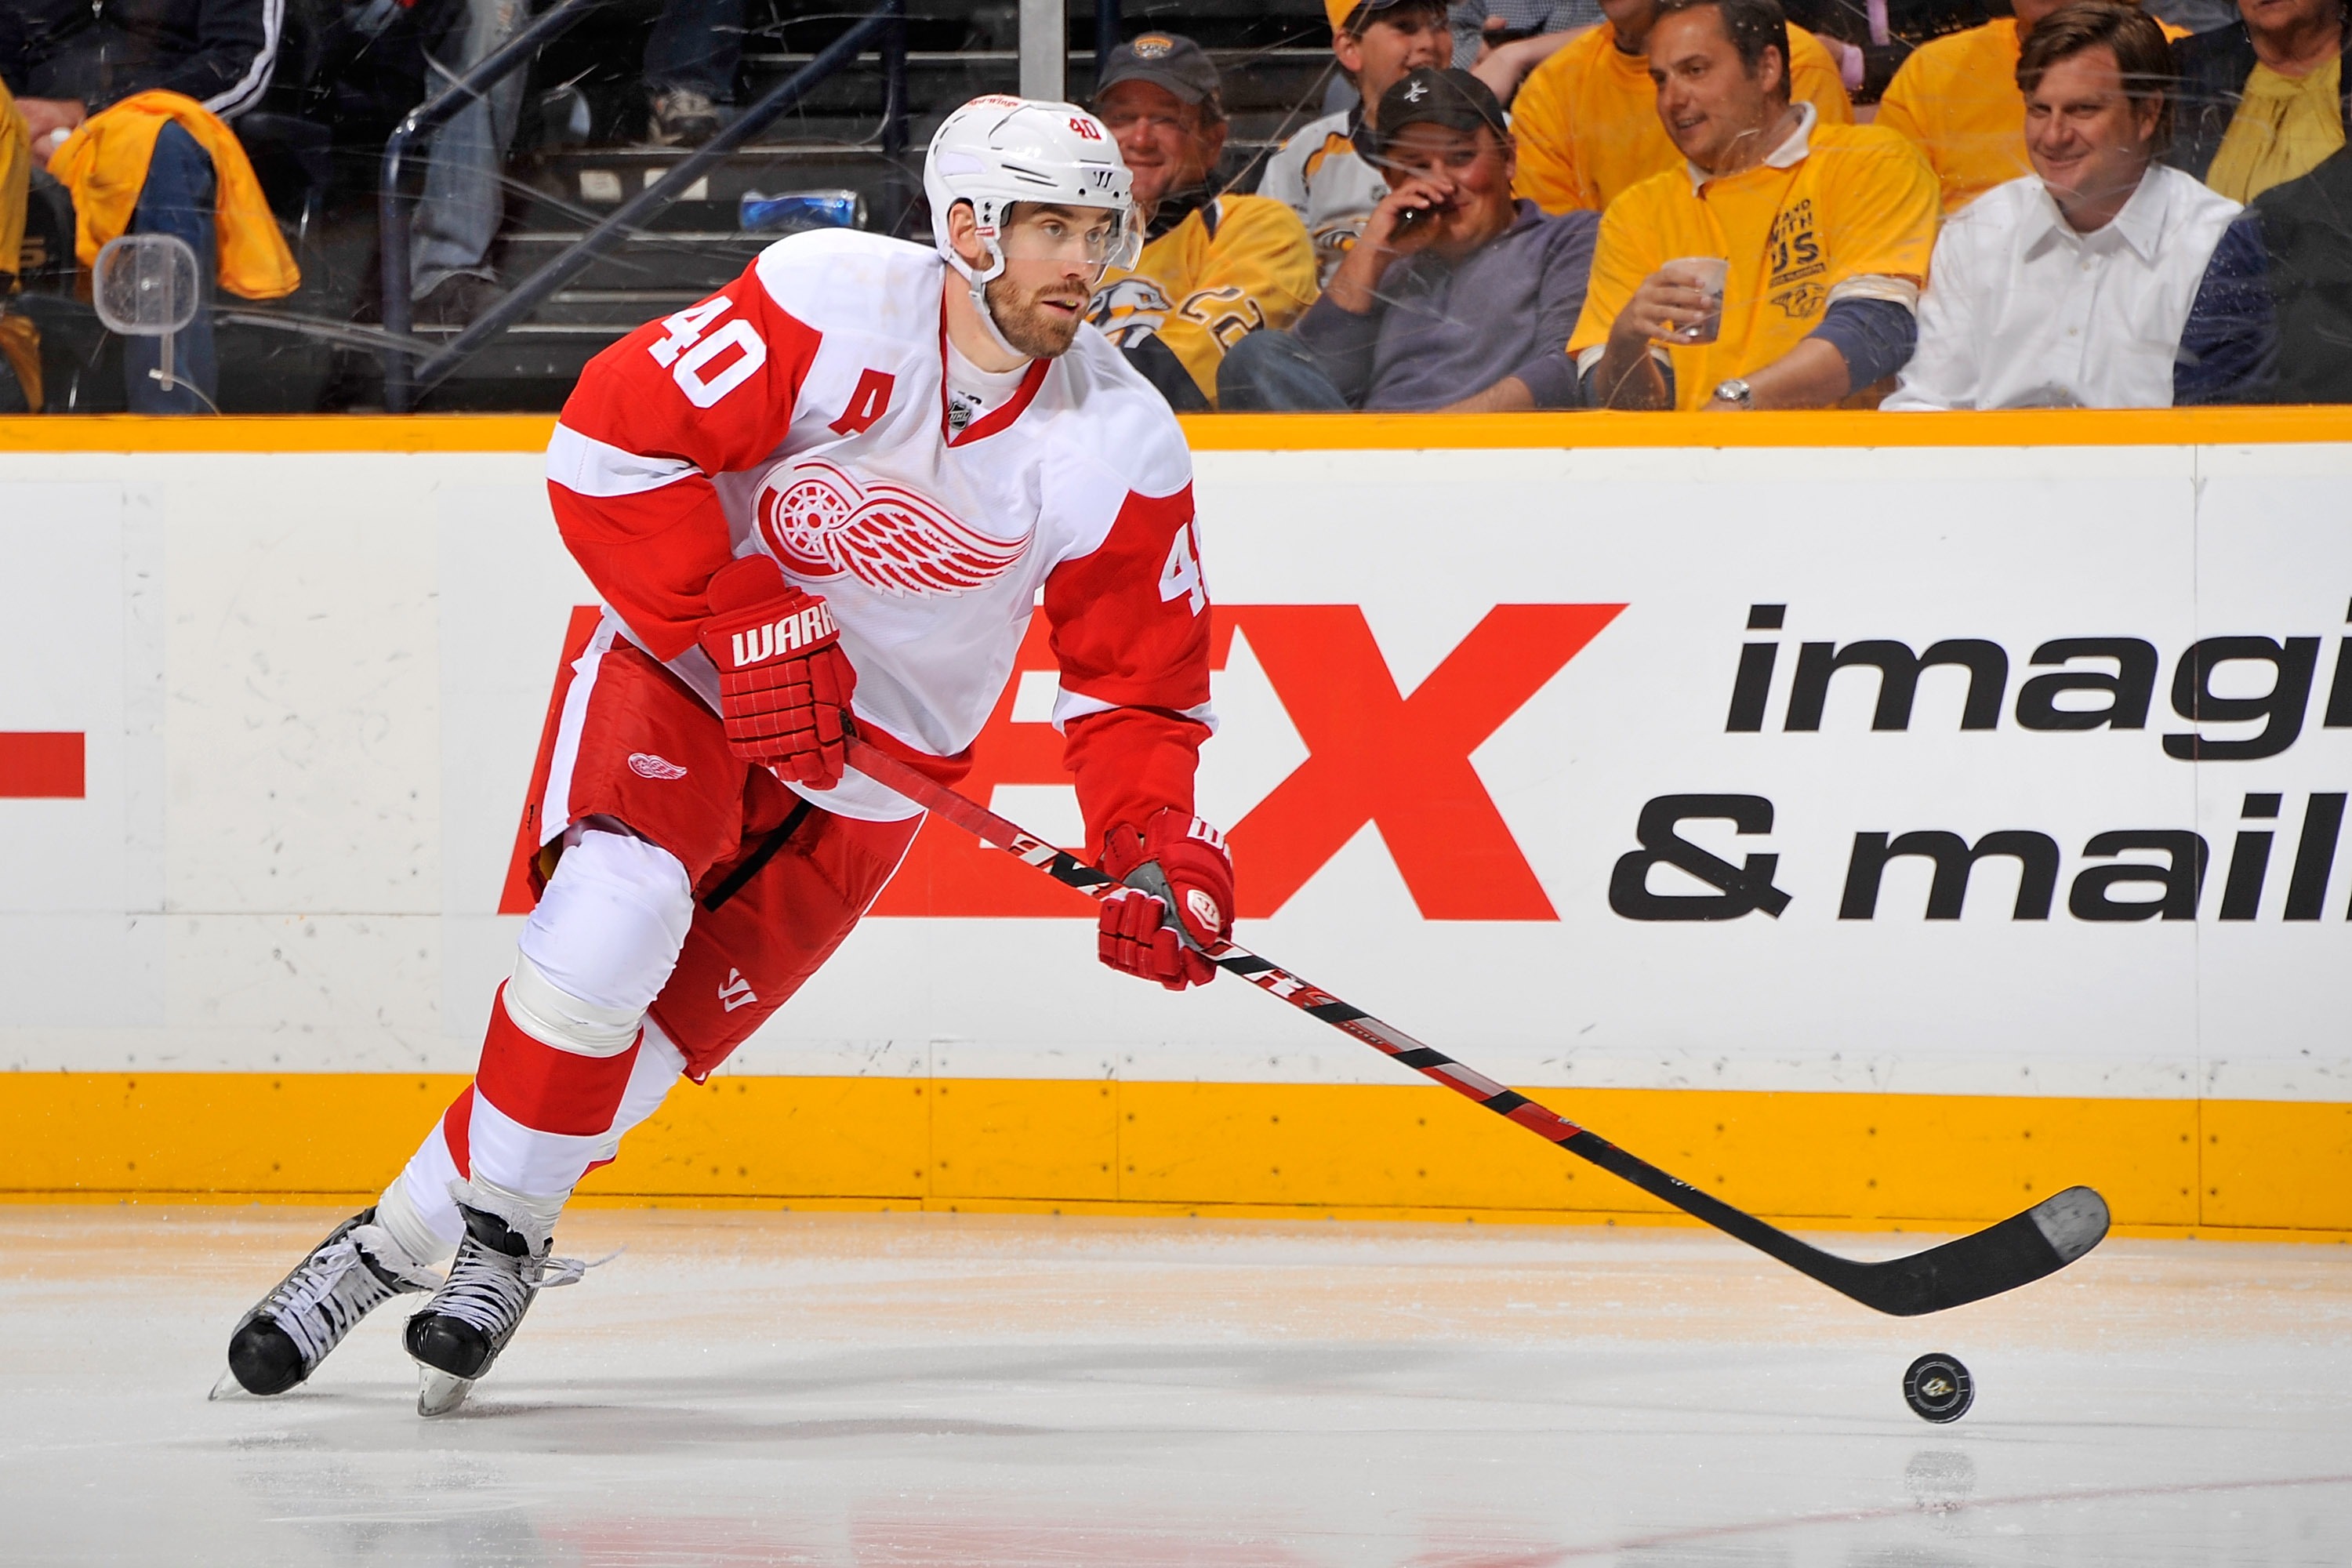 Red Wings history: Detroit sets NHL record consecutive home wins on Feb. 14, 2012